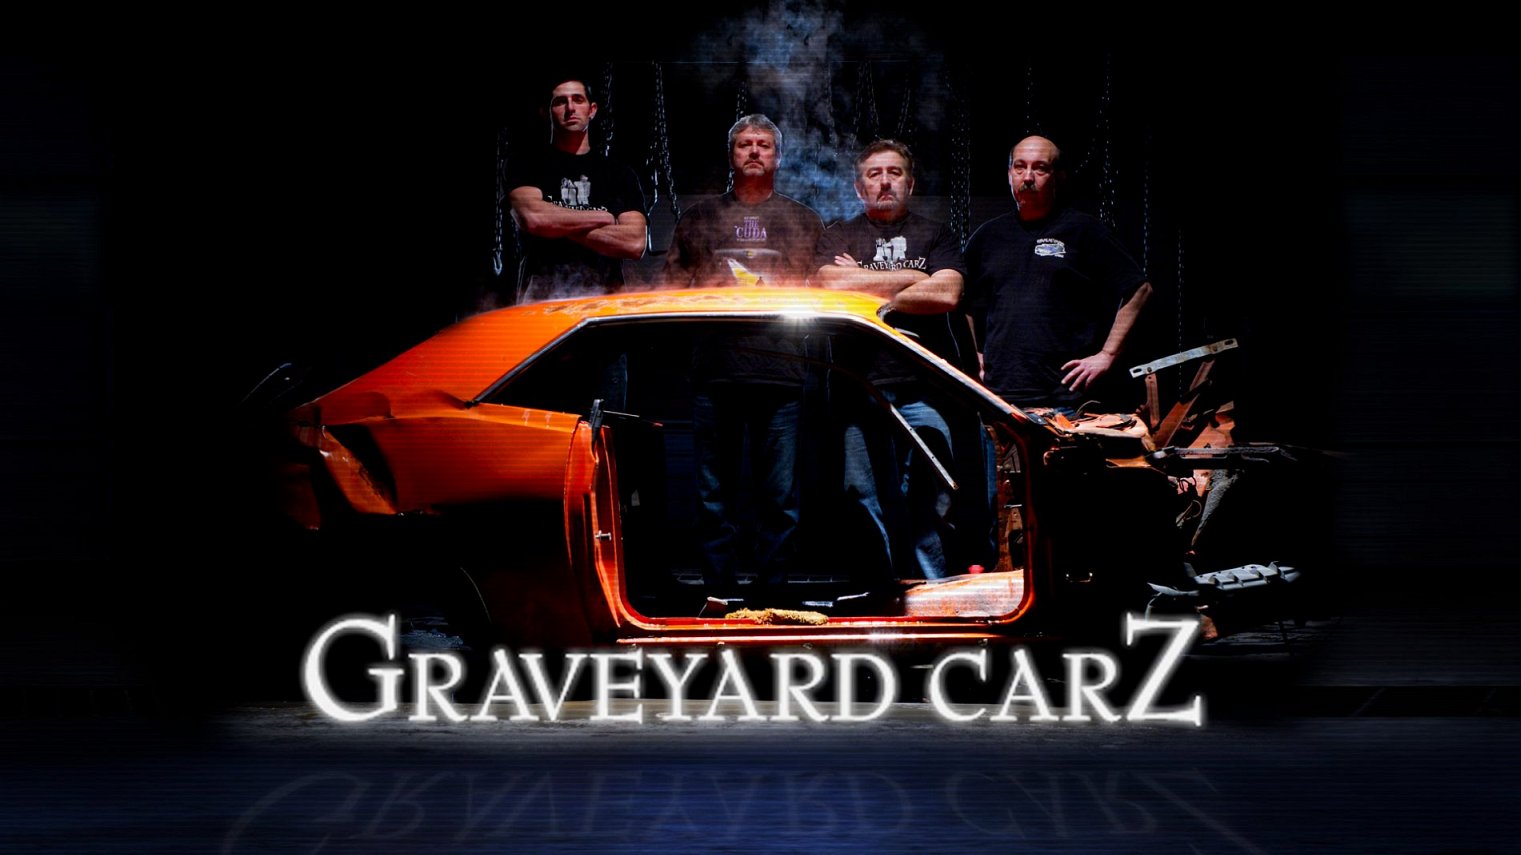 what time is Graveyard Carz on